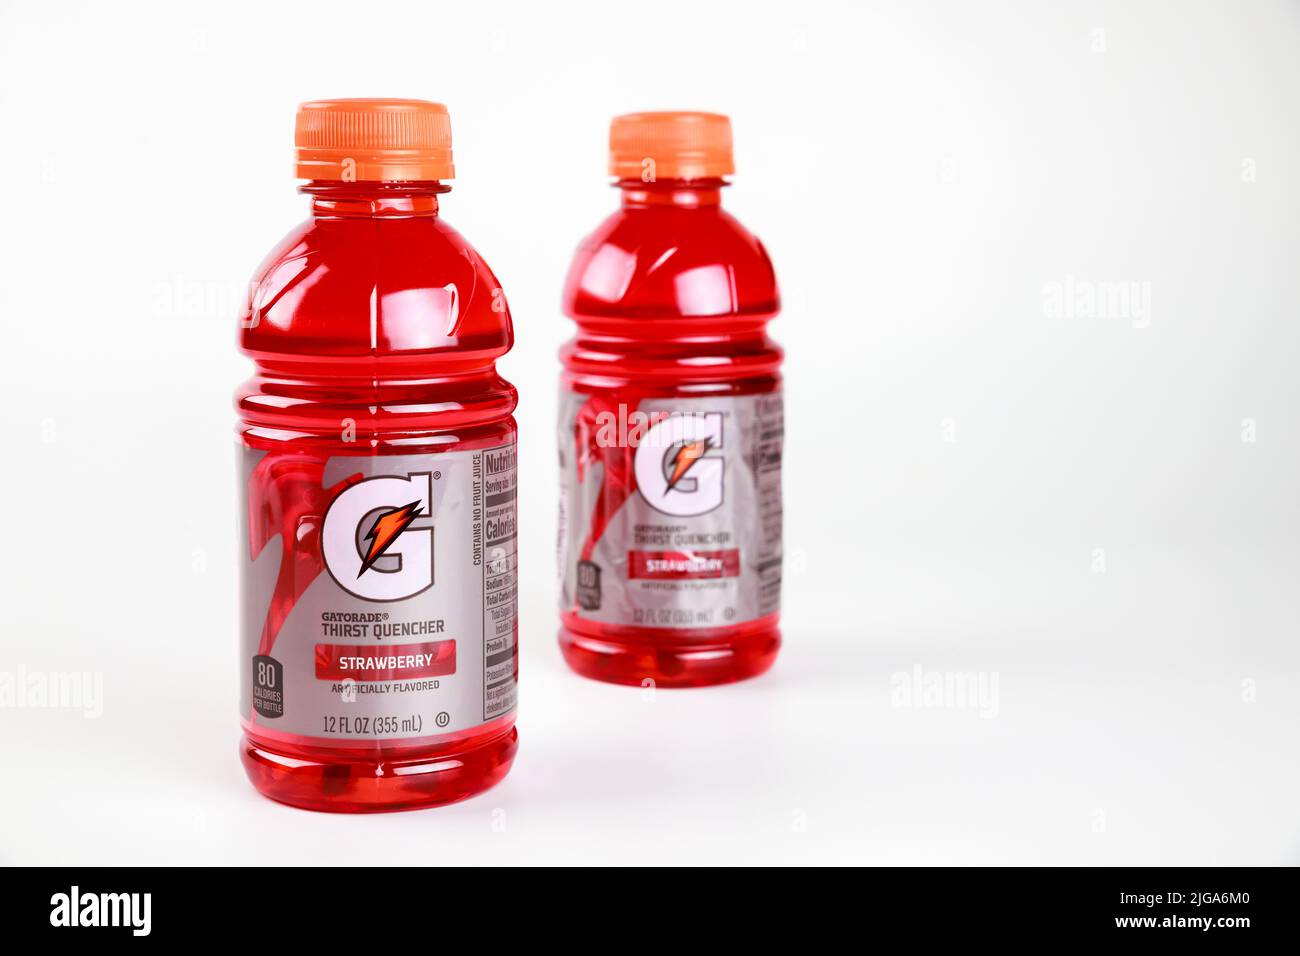 https://c8.alamy.com/comp/2JGA6M0/for-staying-hydrated-you-can-take-a-gatorade-sports-drink-in-a-bottle-with-electrolytes-2JGA6M0.jpg